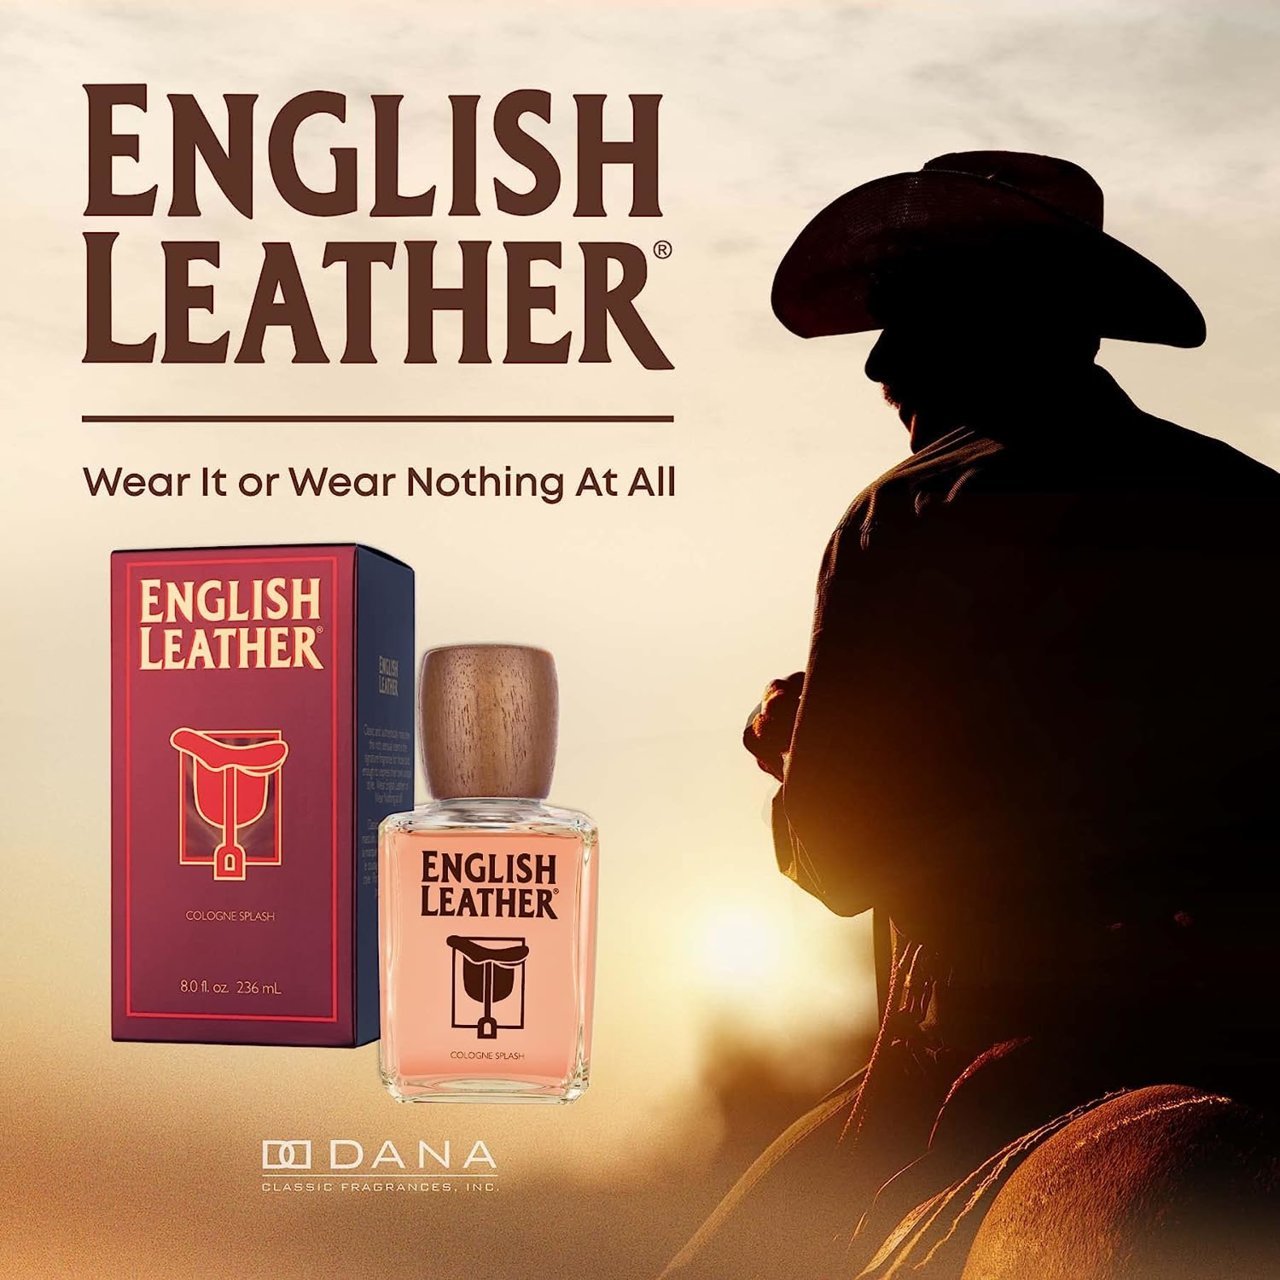 63d5a8cf660e583bf6655a94-dana-english-leather-cologne-for-men-8.jpg